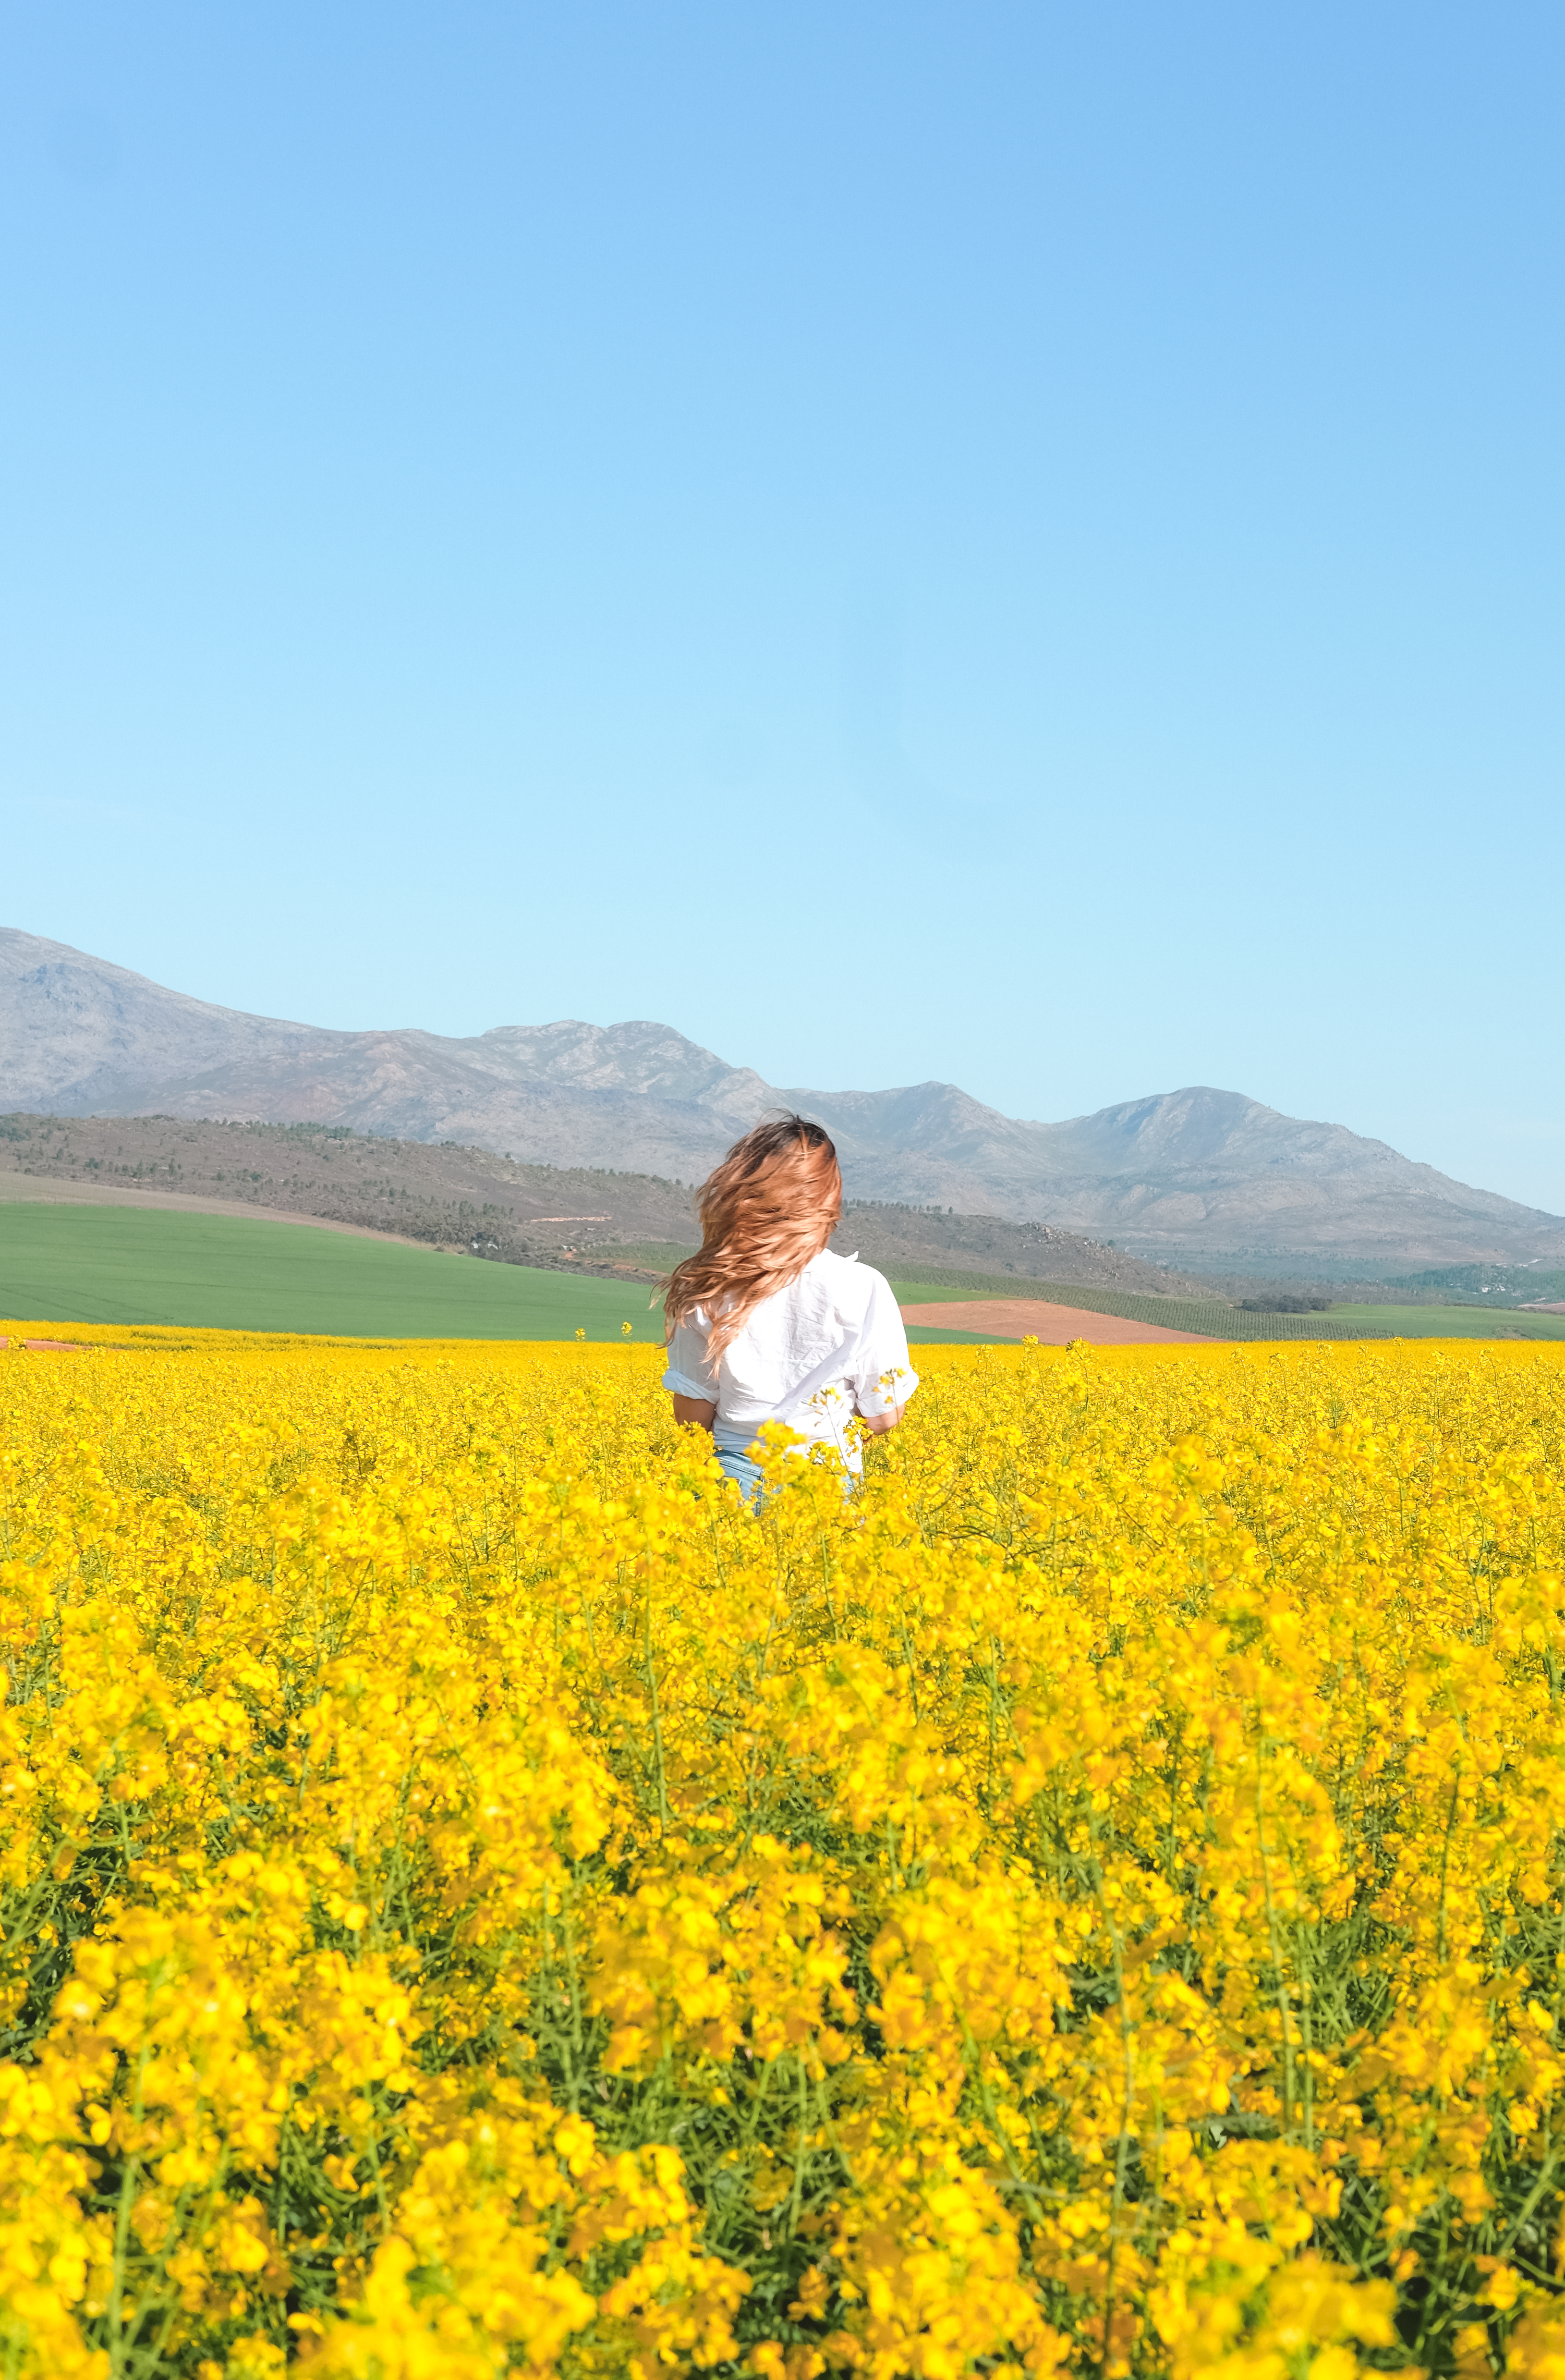 Where To Find Canola Fields In Cape Town - Tails of a MermaidTails ...